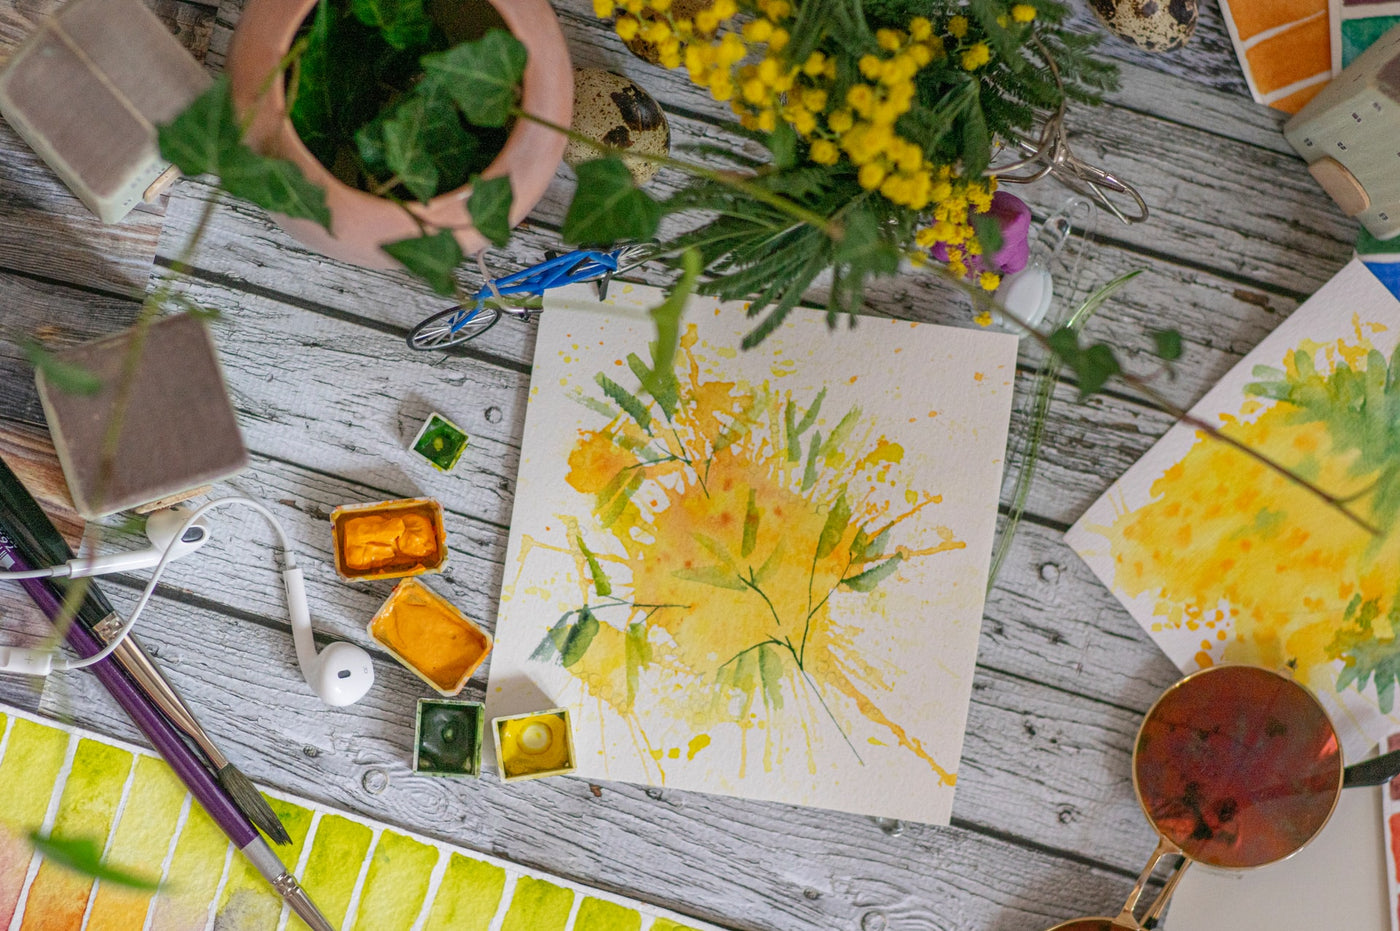 Learn the Reasons Why Painting is Therapeutic